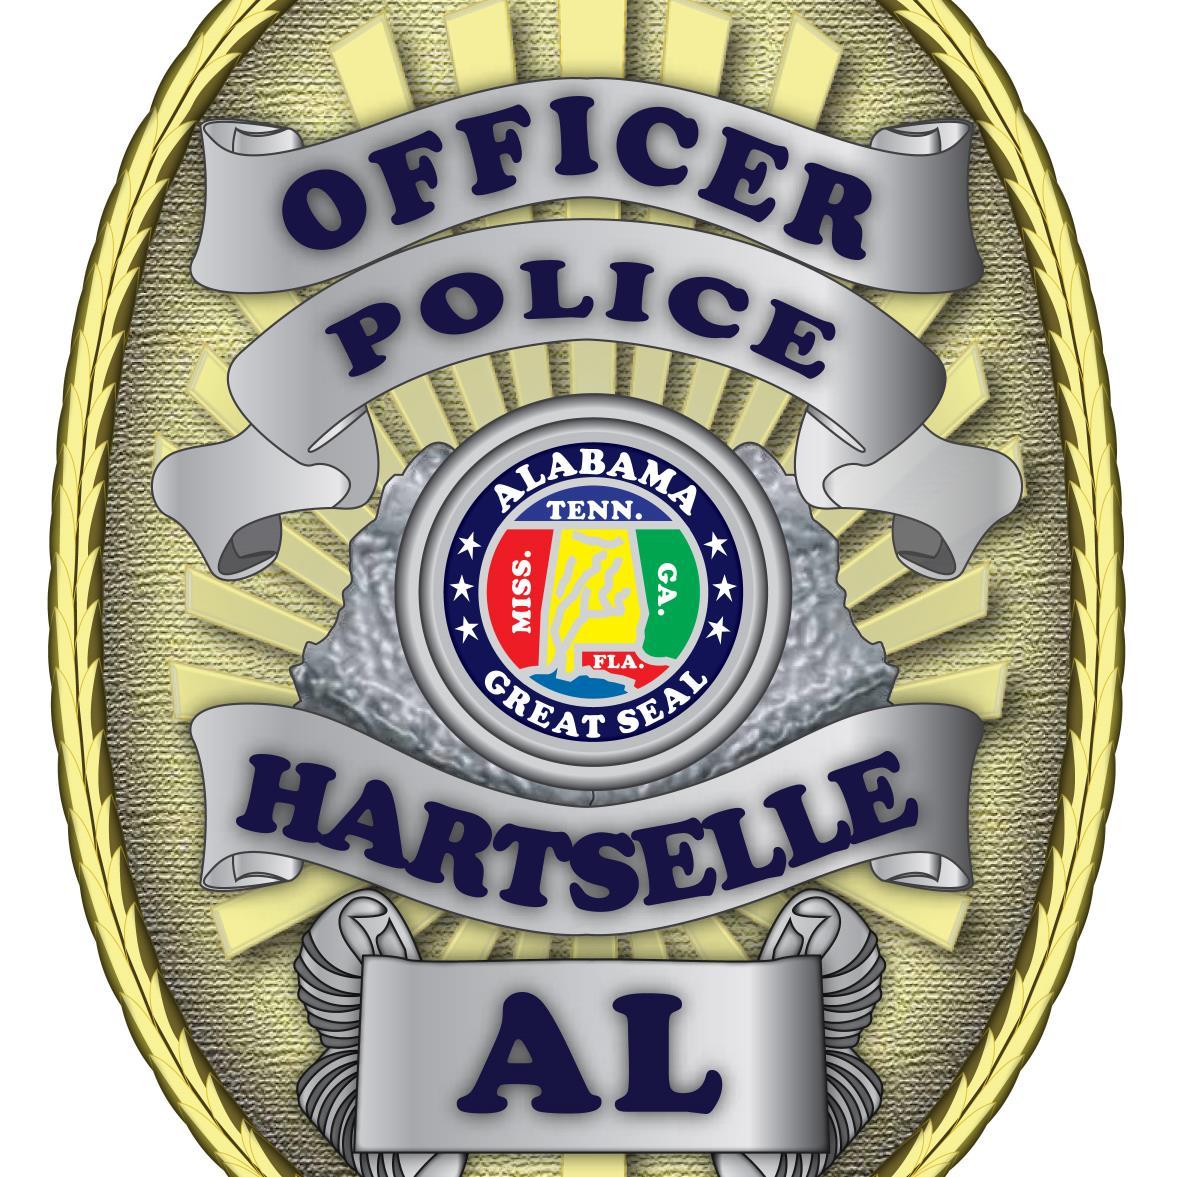 Official Twitter of the Hartselle Police Department | Not monitored 24/7 | Emergencies call 911 | Non-emergencies 256-350-4613 | Terms of use on our website.